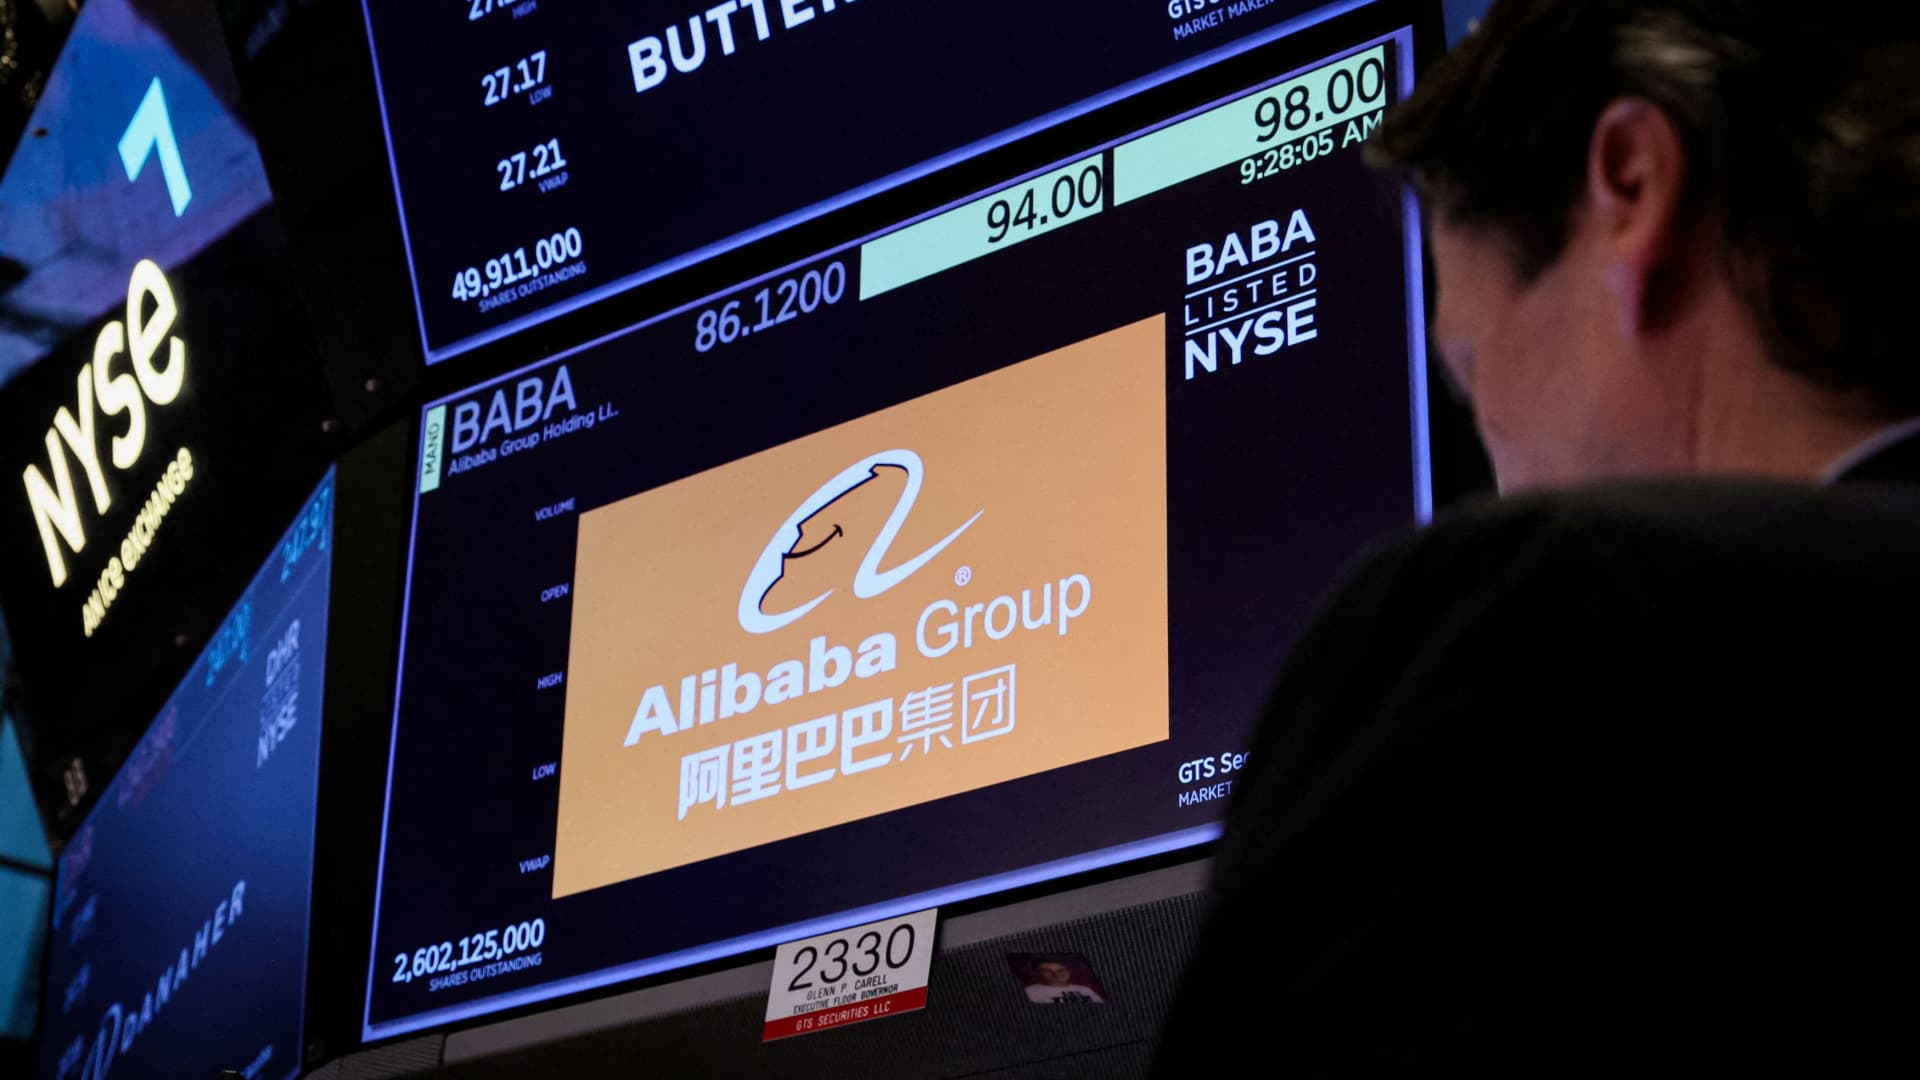 Alibaba CEO Eddie Wu to lead Taobao and Tmall e-commerce business in latest reshuffle